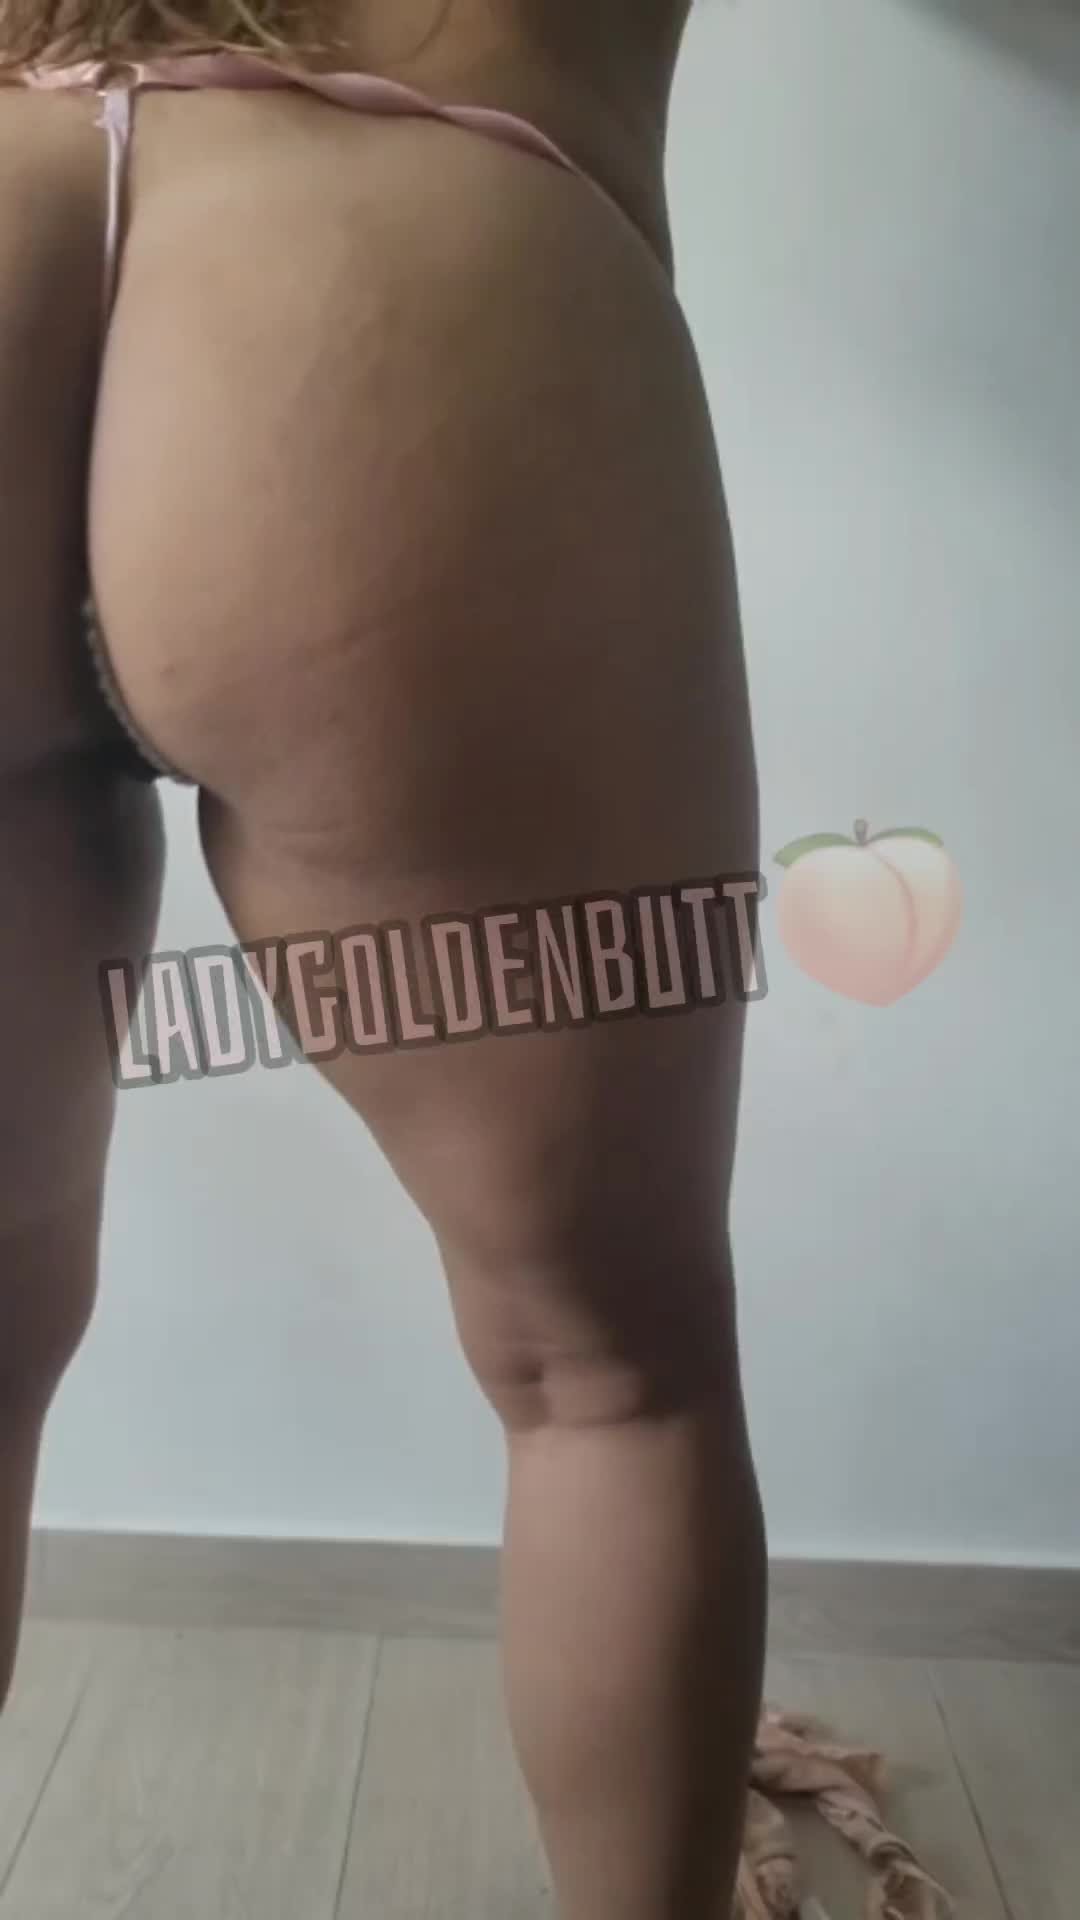 Video post by Ladygoldenbutt